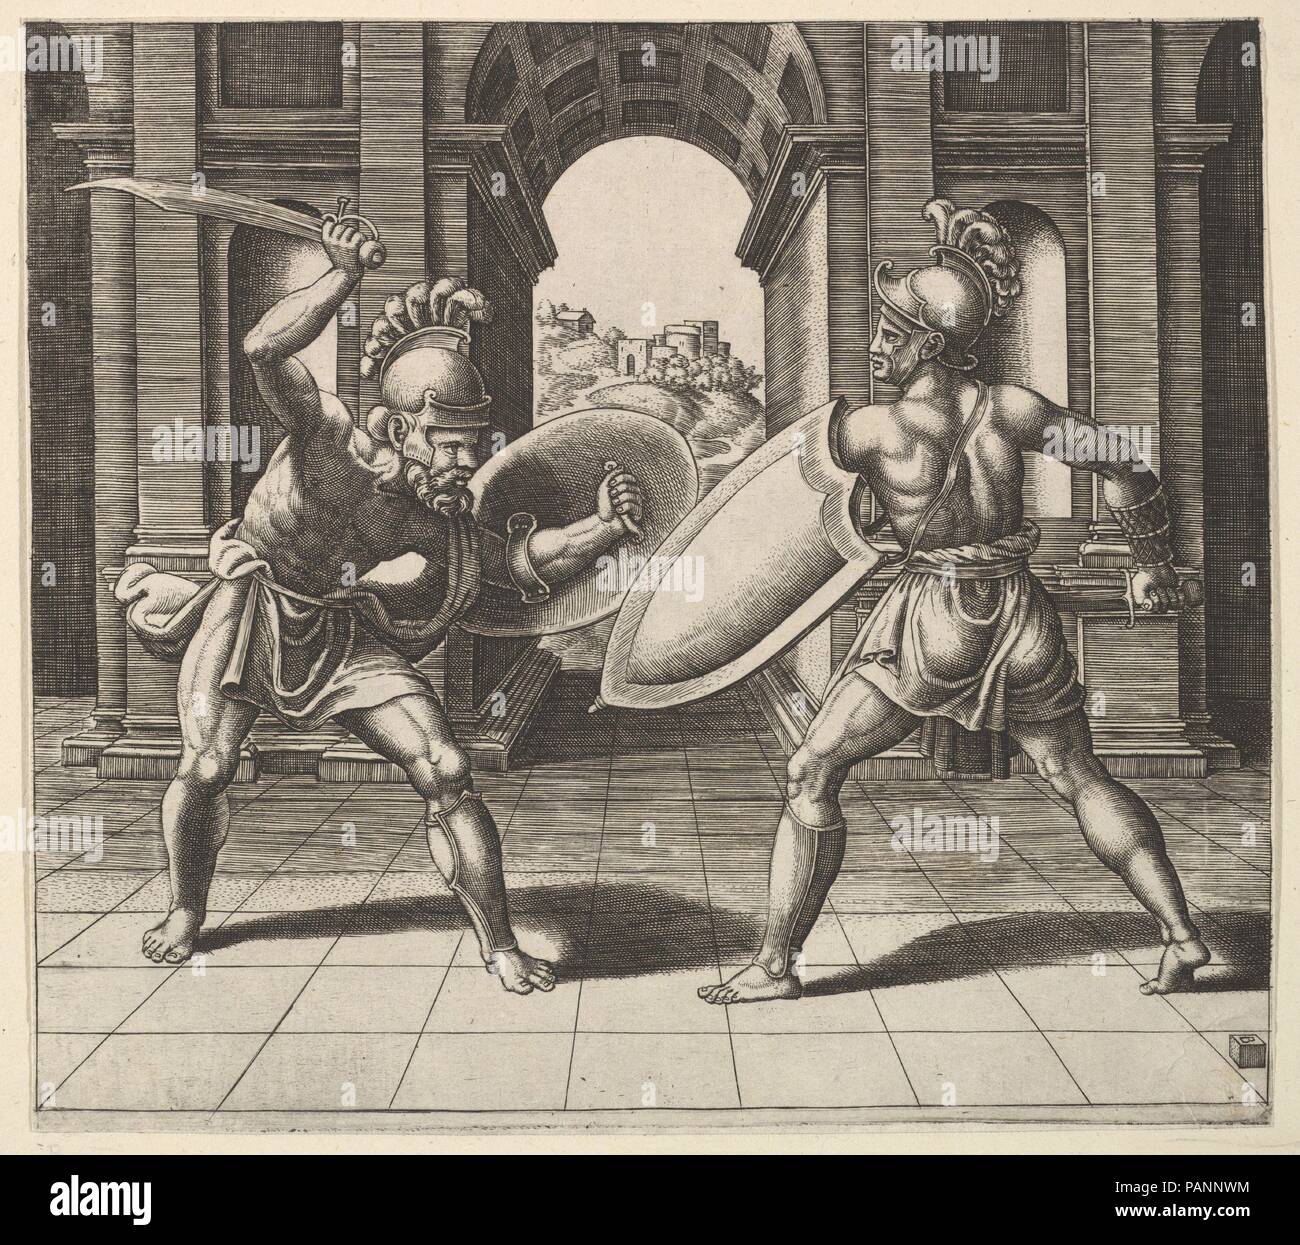 Two gladiators fighting in front of an arch. Artist: After Giulio Romano (Italian, Rome 1499?-1546 Mantua); Master of the Die (Italian, active Rome, ca. 1530-60). Dimensions: sheet: 8 1/16 x 9 1/16 in. (20.5 x 23 cm). Date: 1530-60. Museum: Metropolitan Museum of Art, New York, USA. Stock Photo